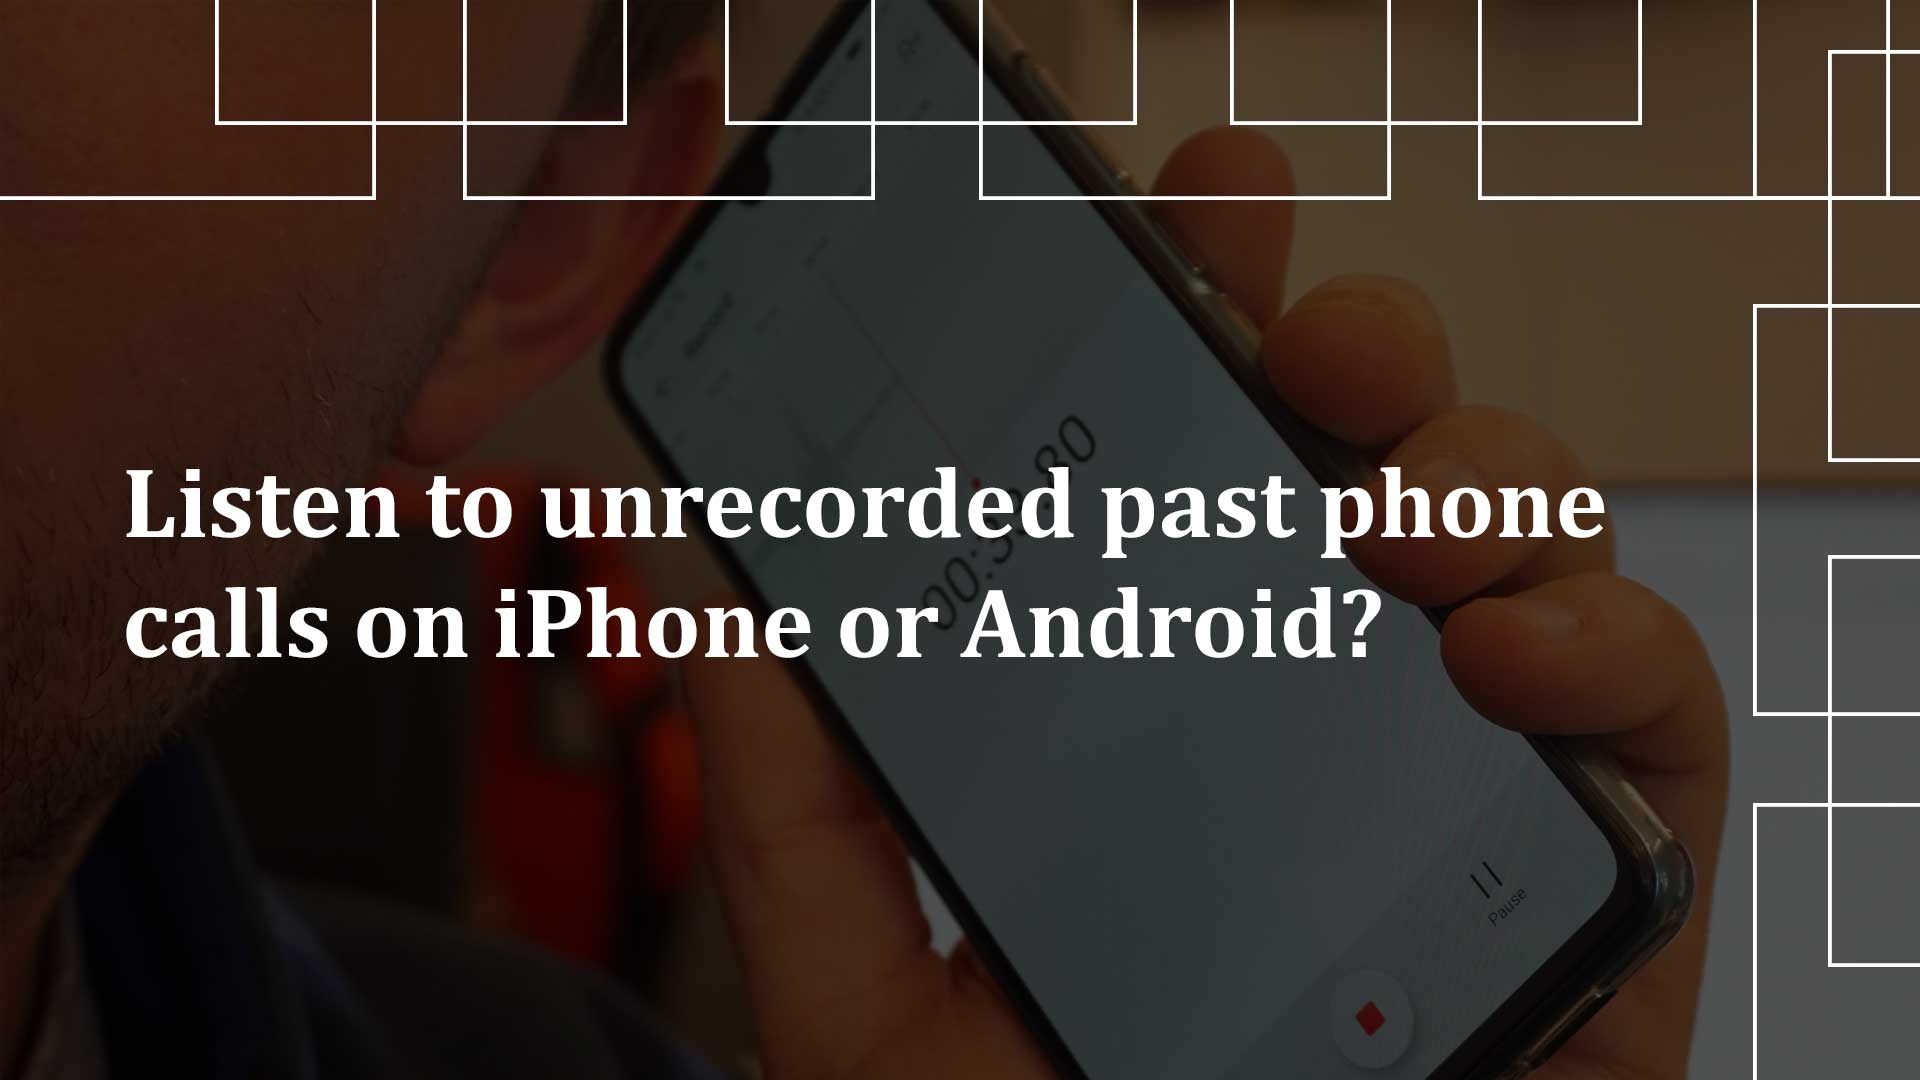 How to listen to unrecorded past phone calls on iPhone or Android?